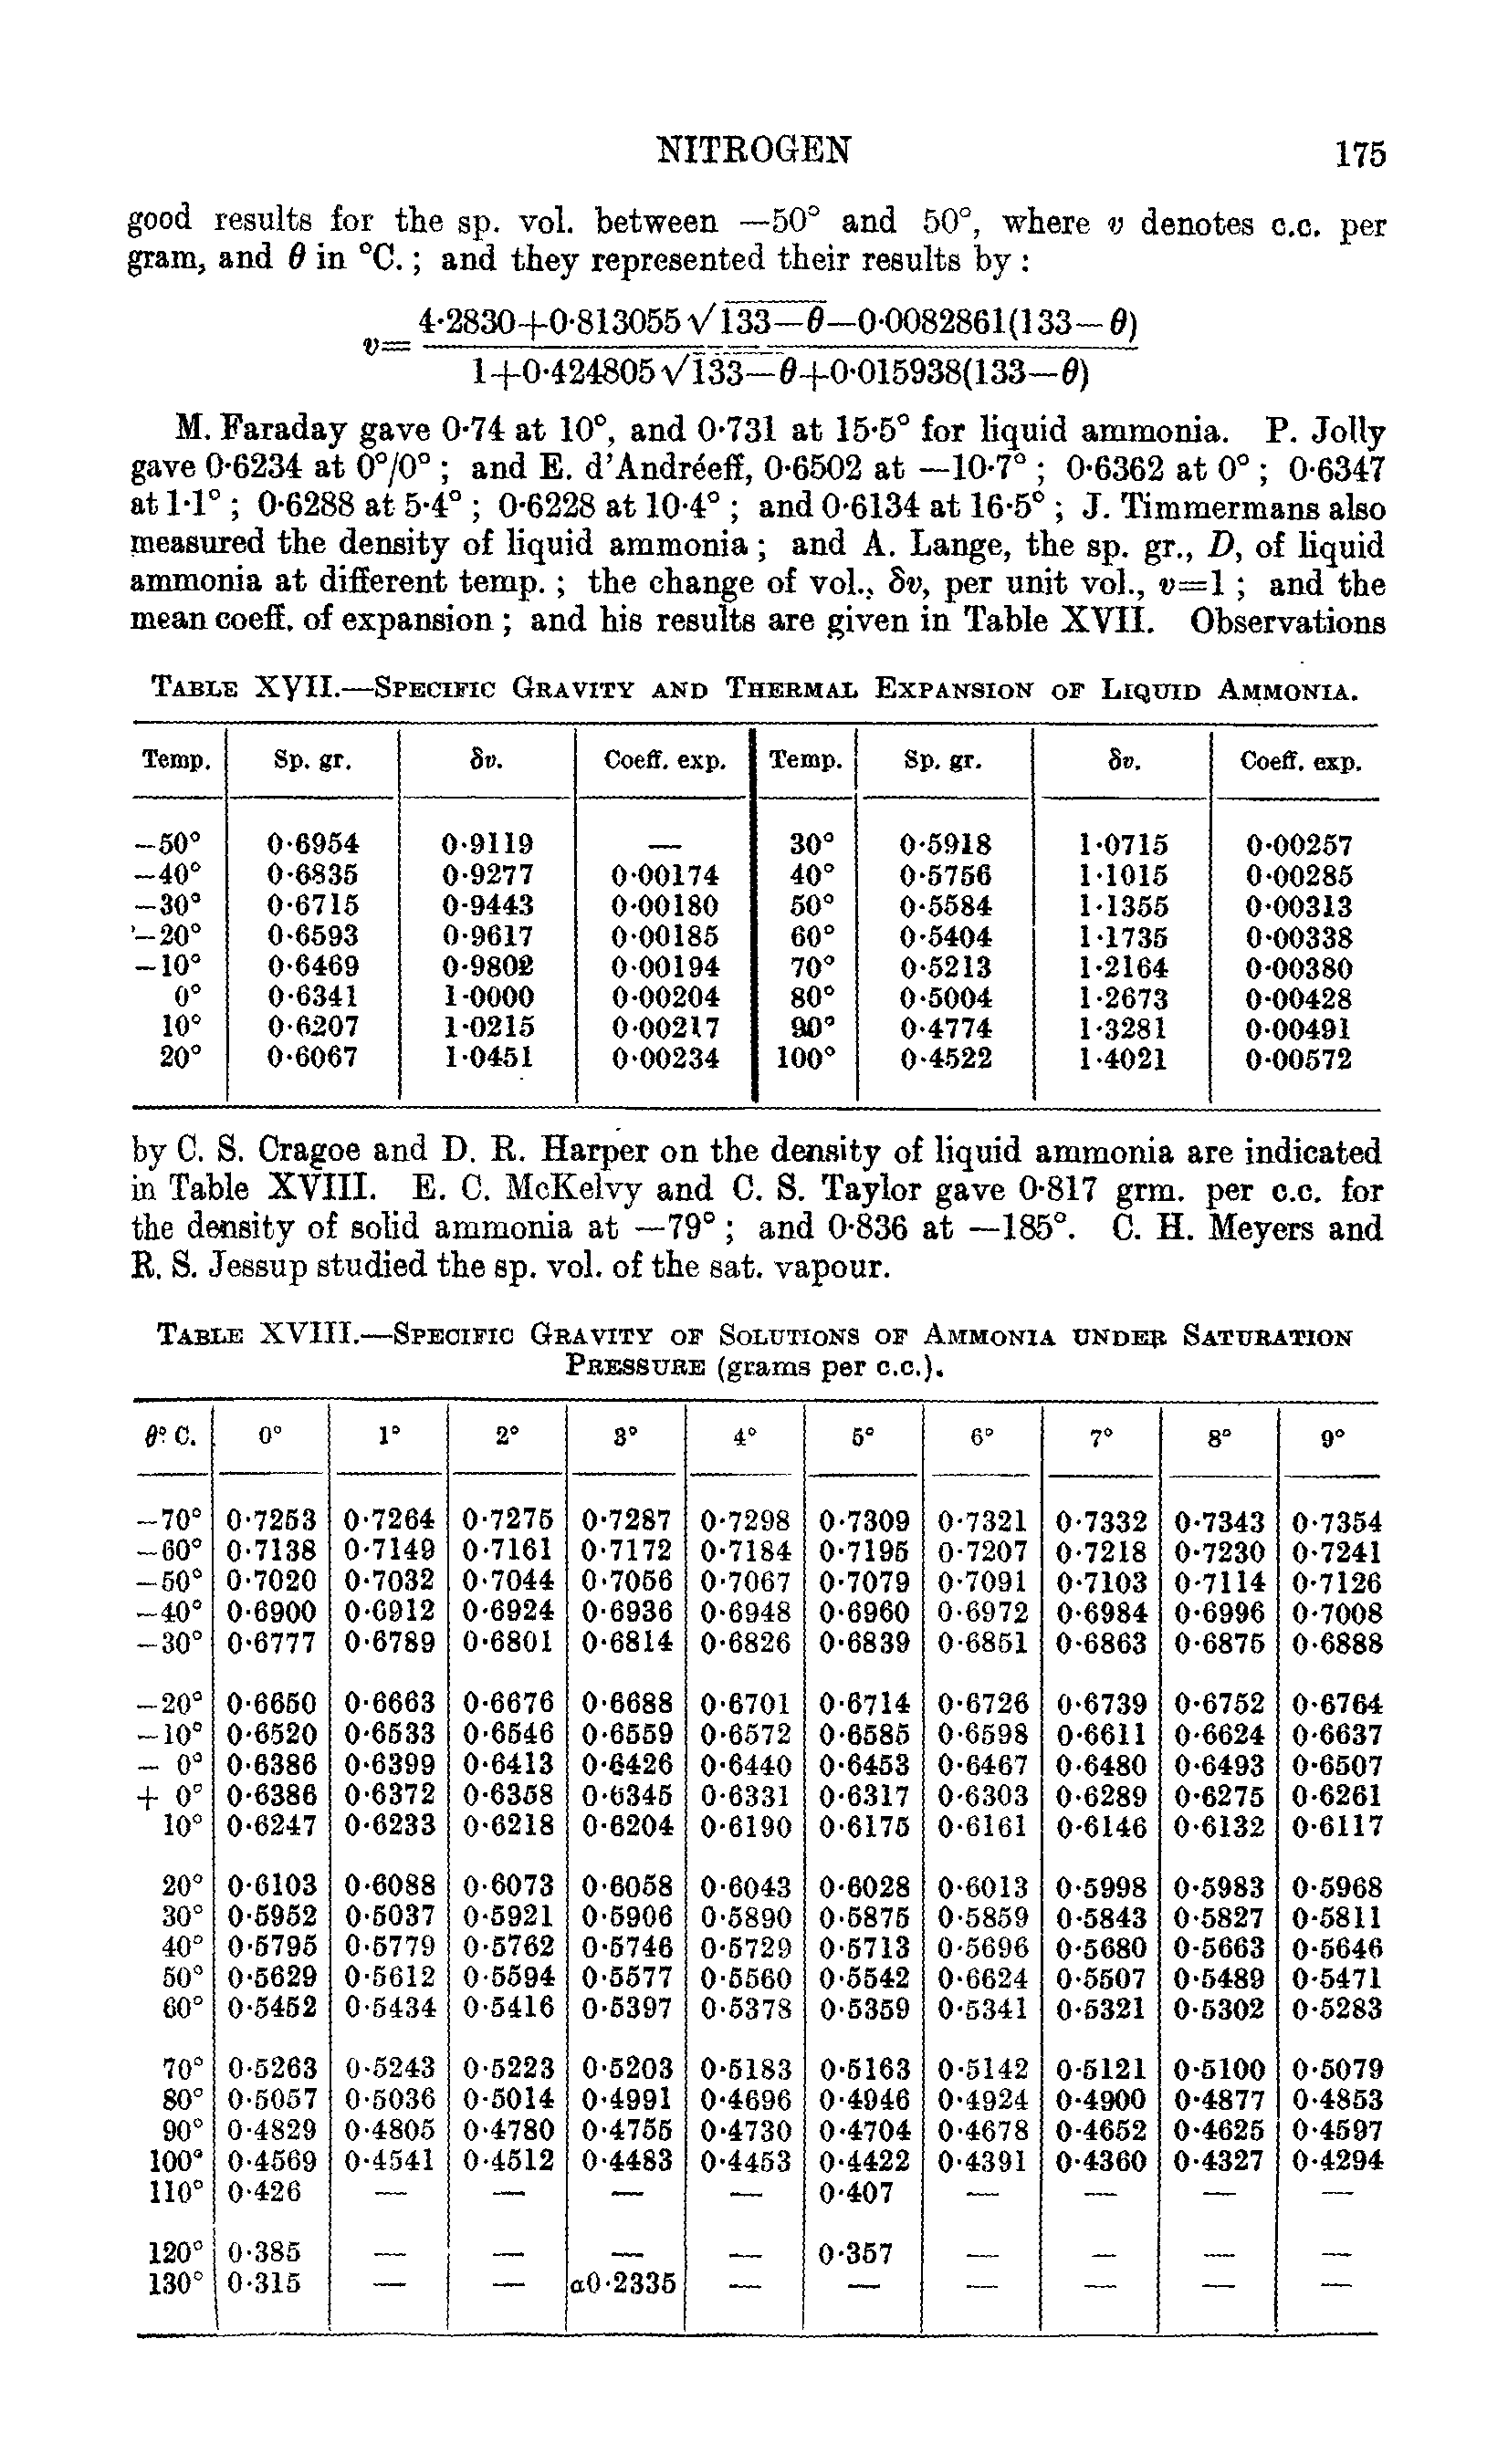 Table XVIII.—Specific Gravity of Solutions of Ammonia under Saturation Pressure (grams per o.o.).